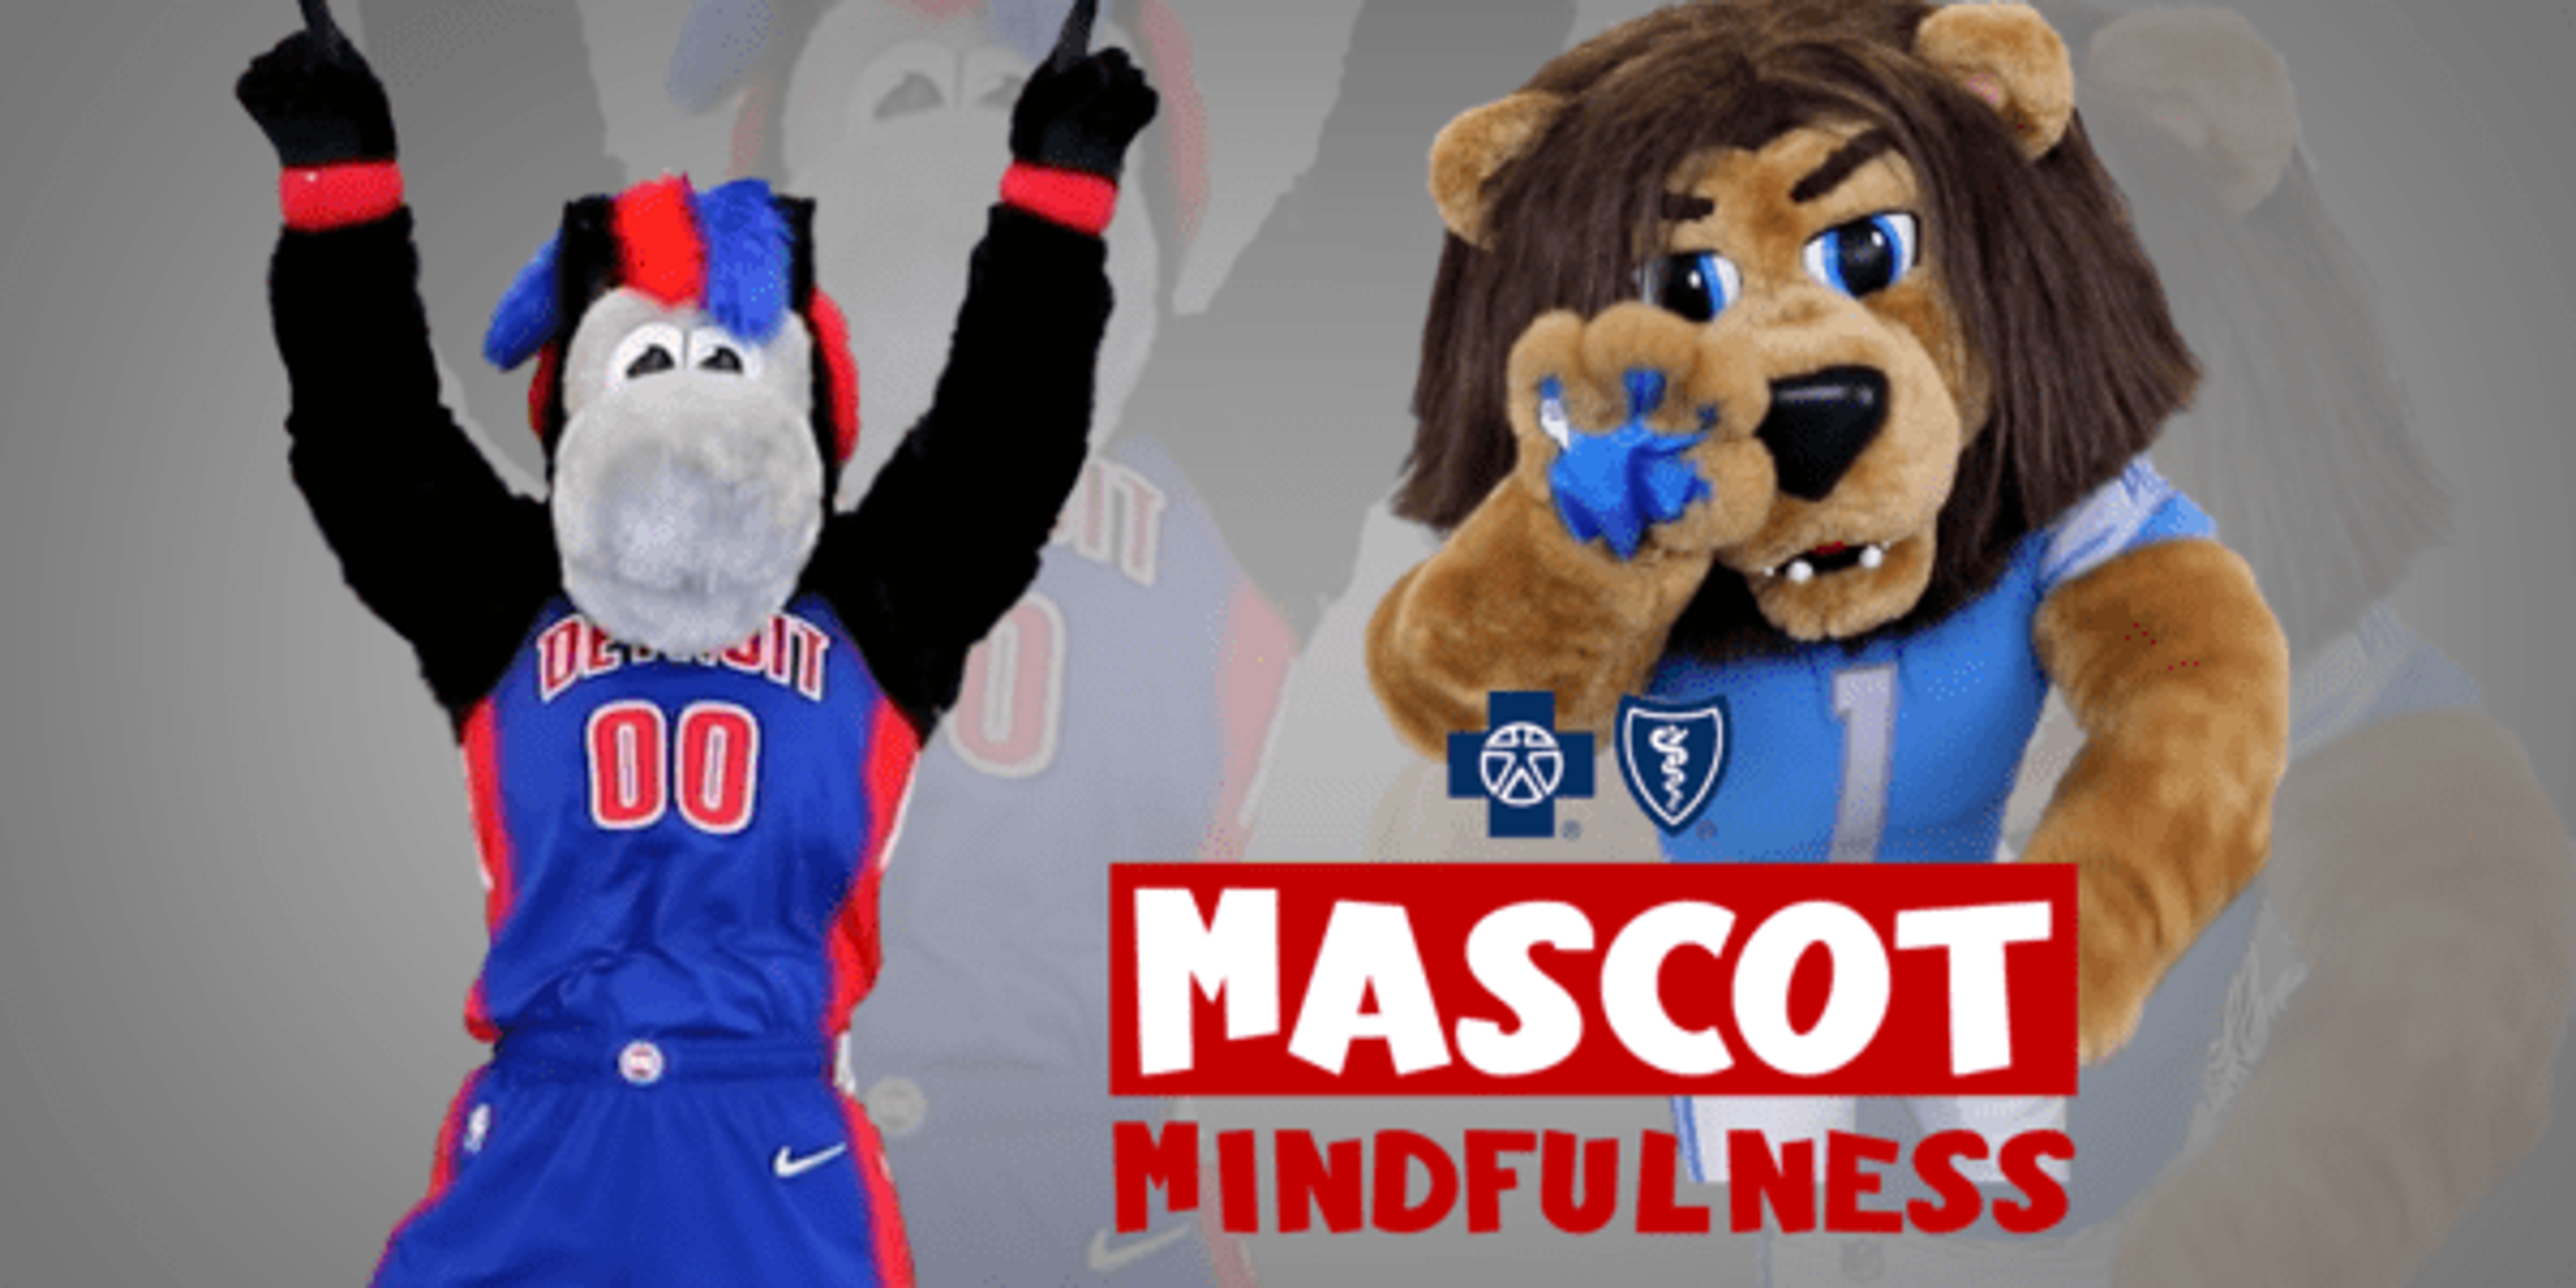 mascot tips  How to be a mascot